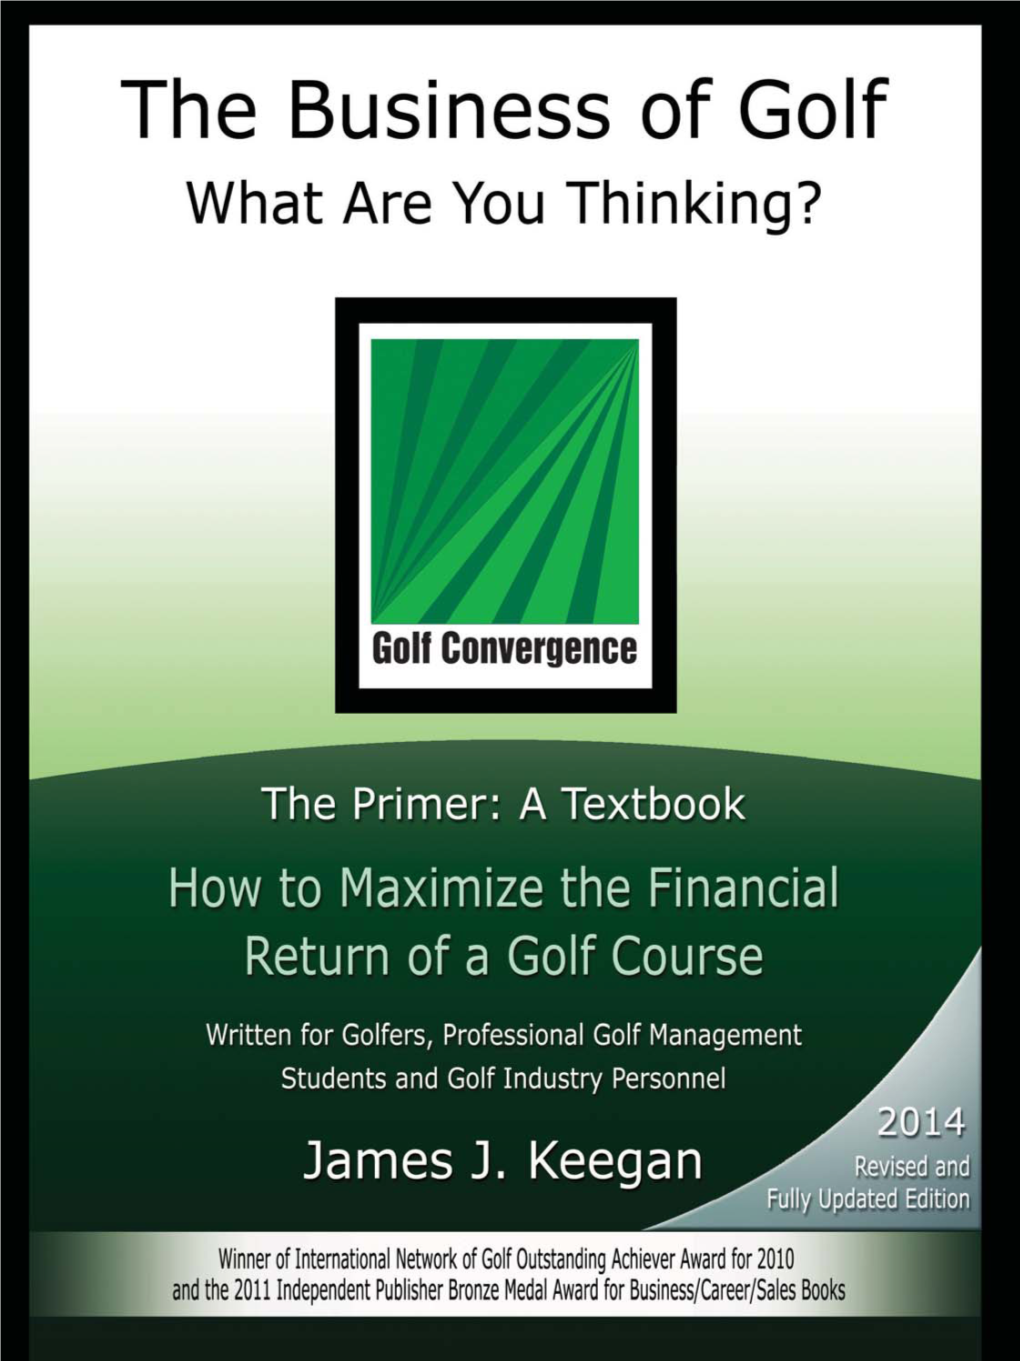 THE BUSINESS of GOLF What Are You Thinking?